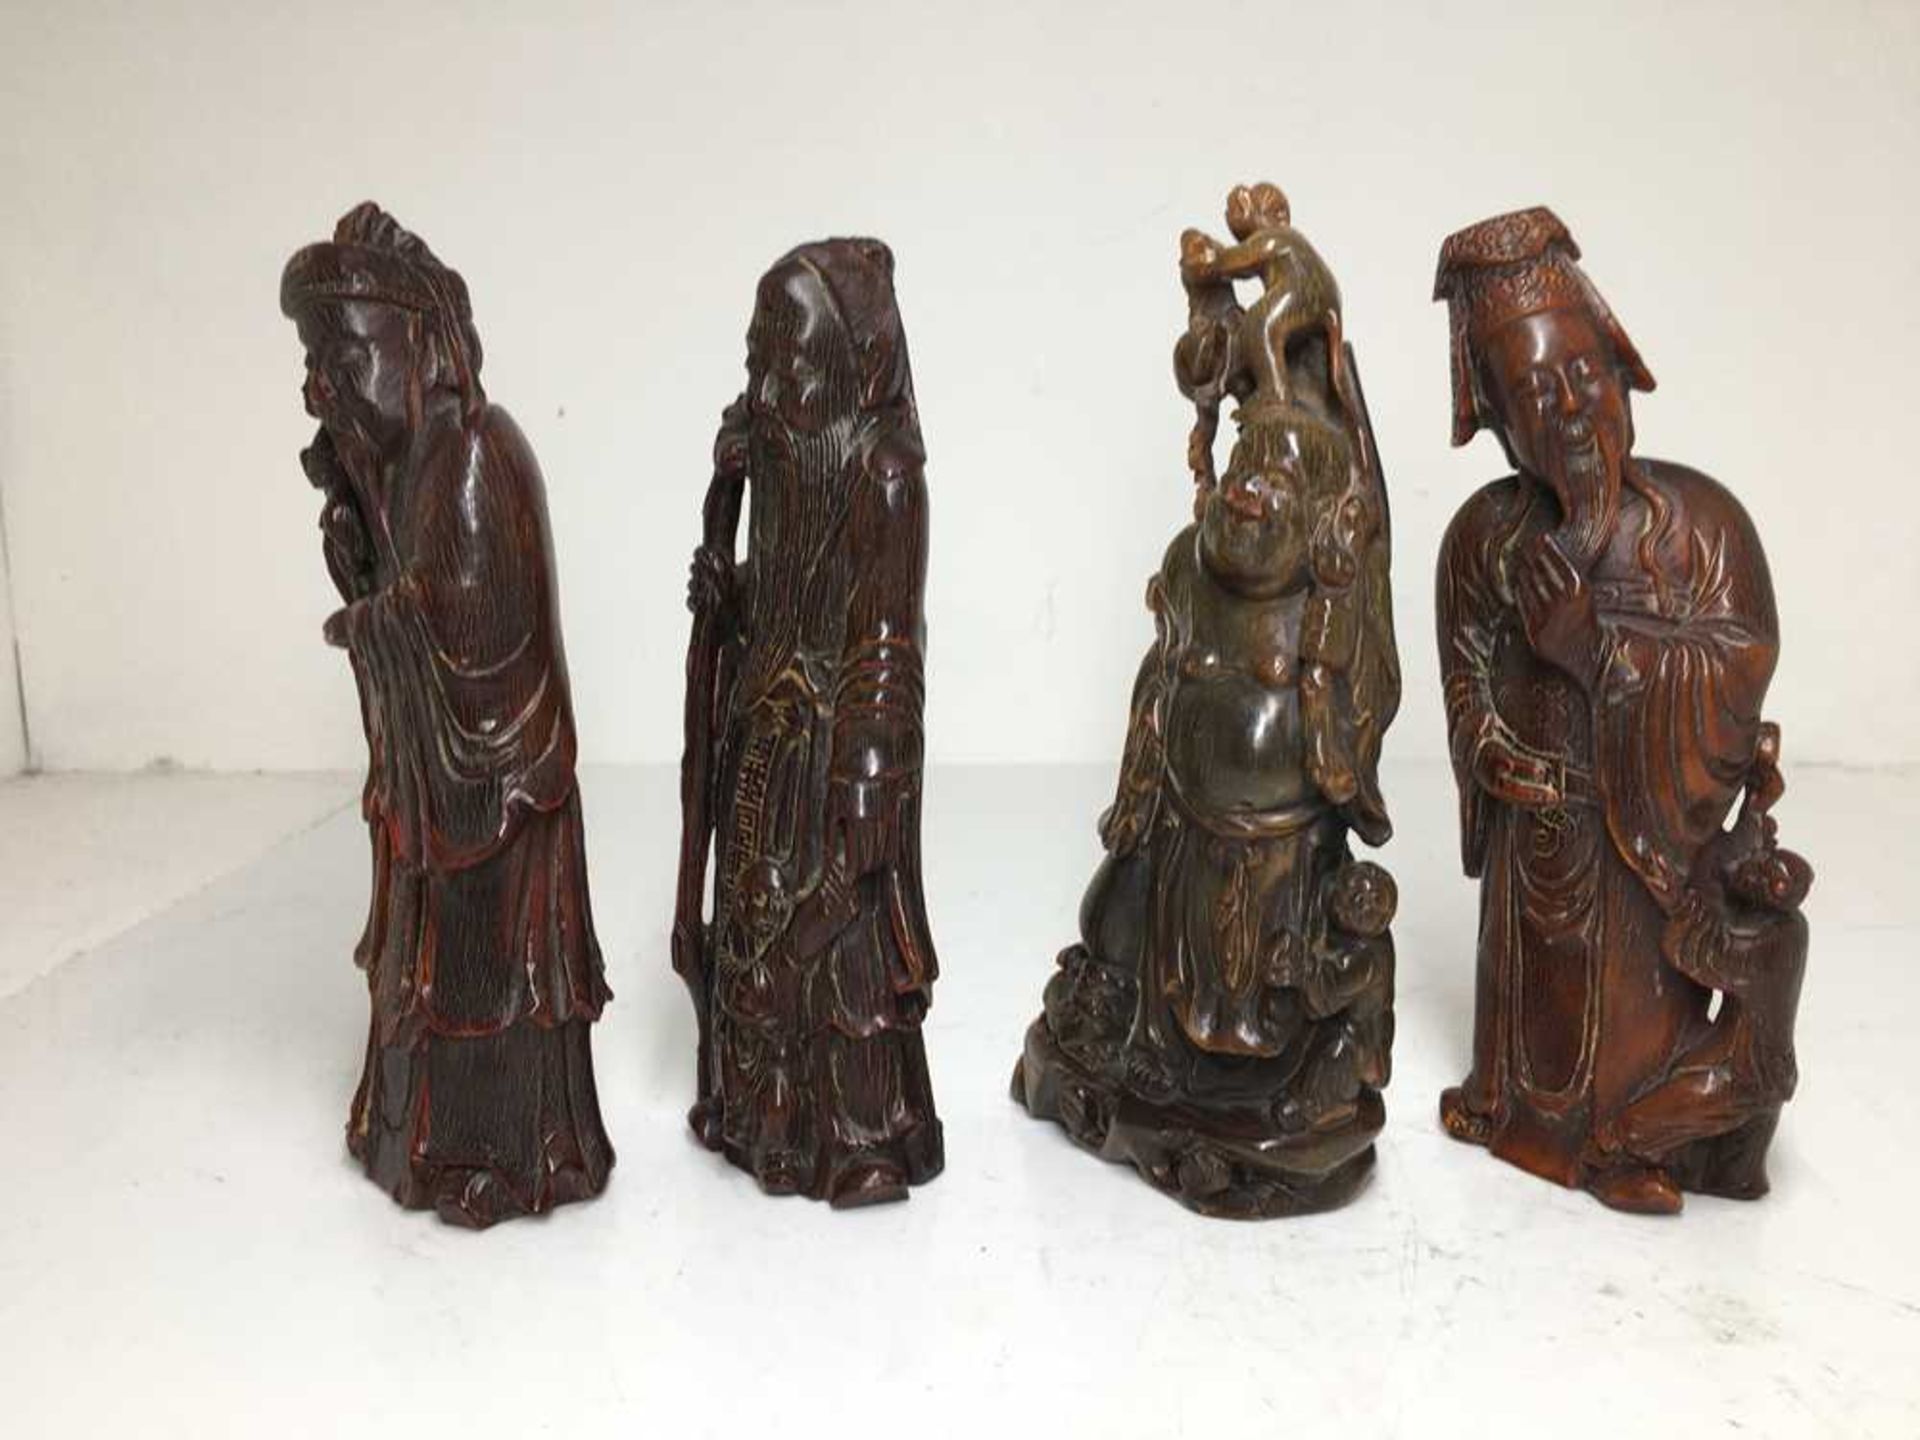 GROUP OF SIX CARVED BUFFALO HORN FIGURES 19TH-20TH CENTURY - Image 9 of 26